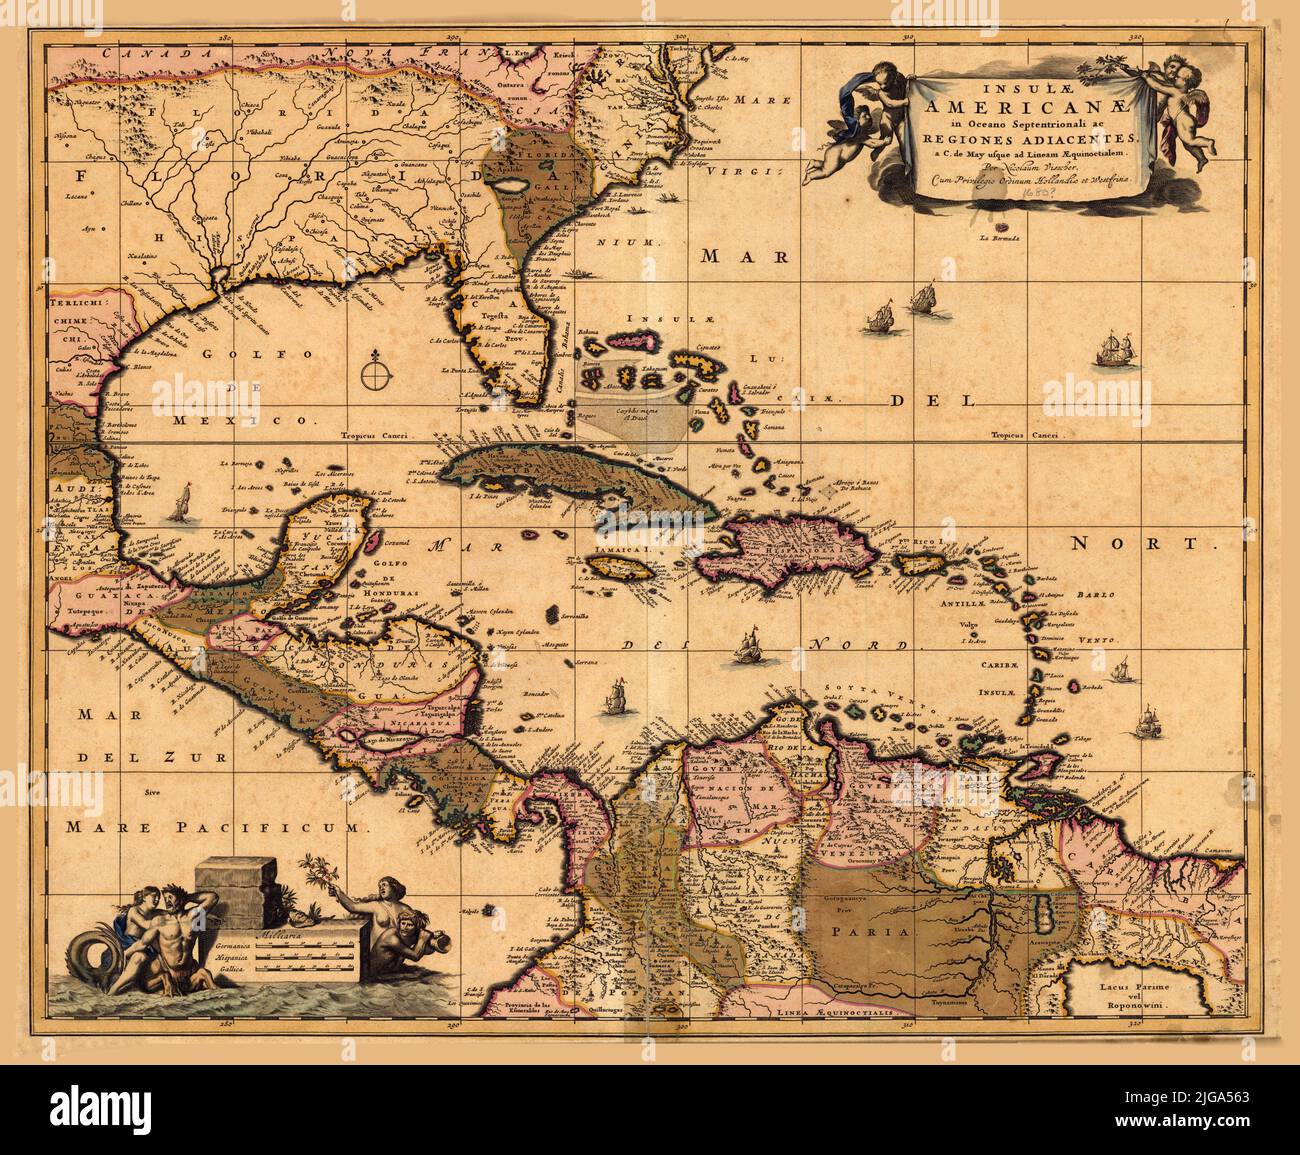 Map of Islands of Americas, 1680, by Nicolaes Visscher Stock Photo